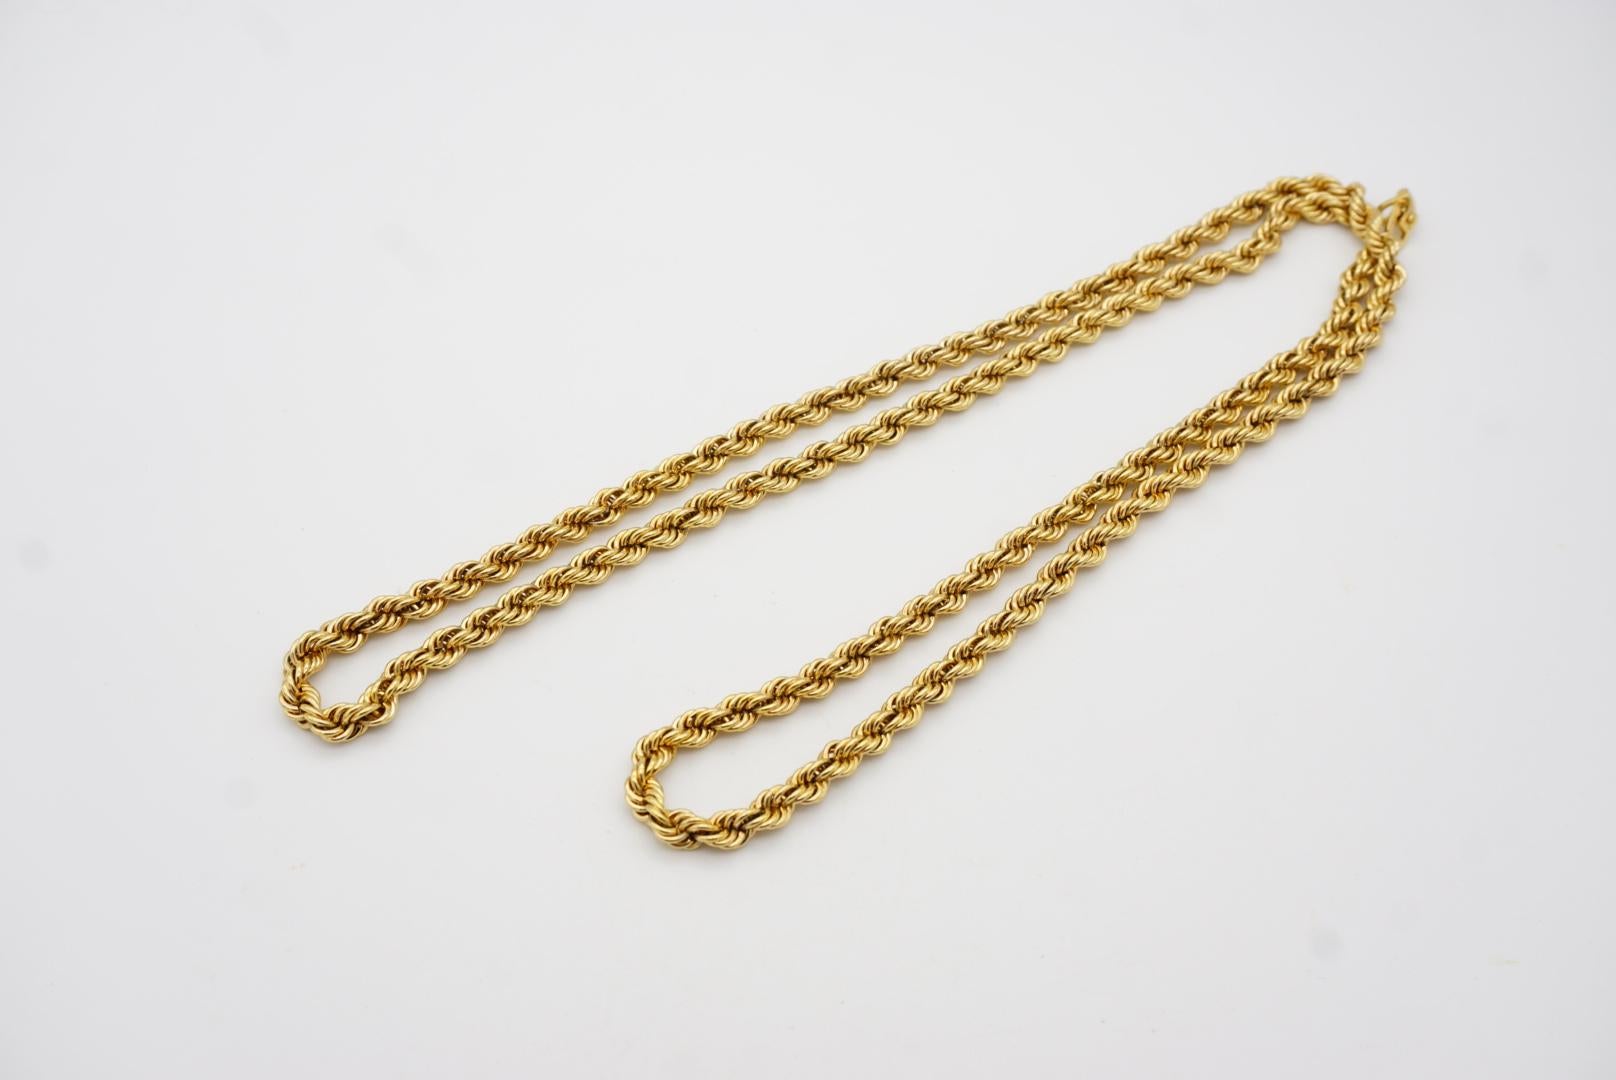 Christian Dior Vintage 1980s Versatile Twist Rope Chain Gold Long Necklace For Sale 7